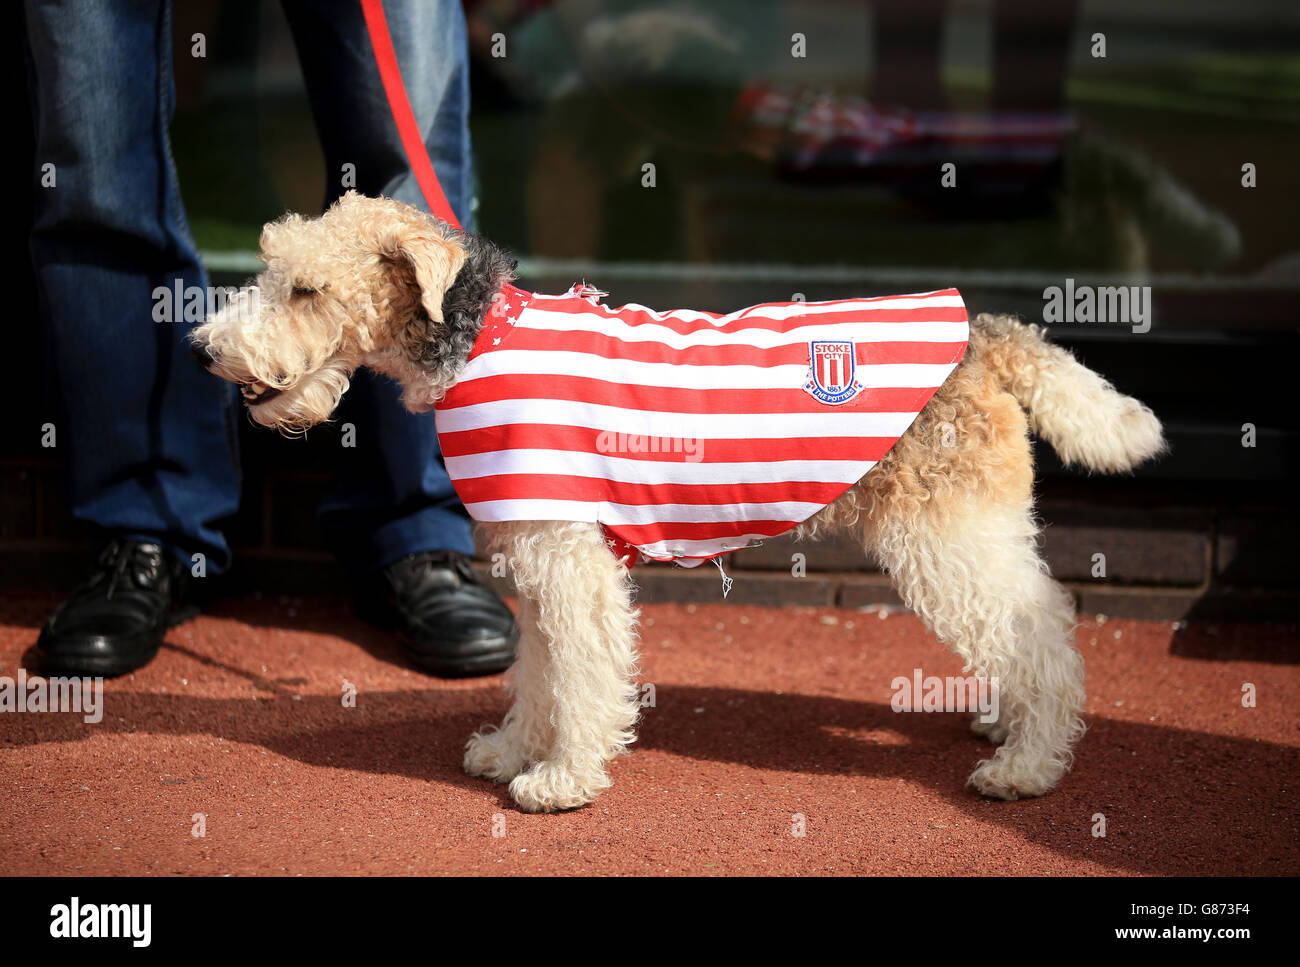 A dog shows support for Stoke City during the Barclays Premier League match at The Britannia Stadium, Stoke-upon-Trent. Stock Photo